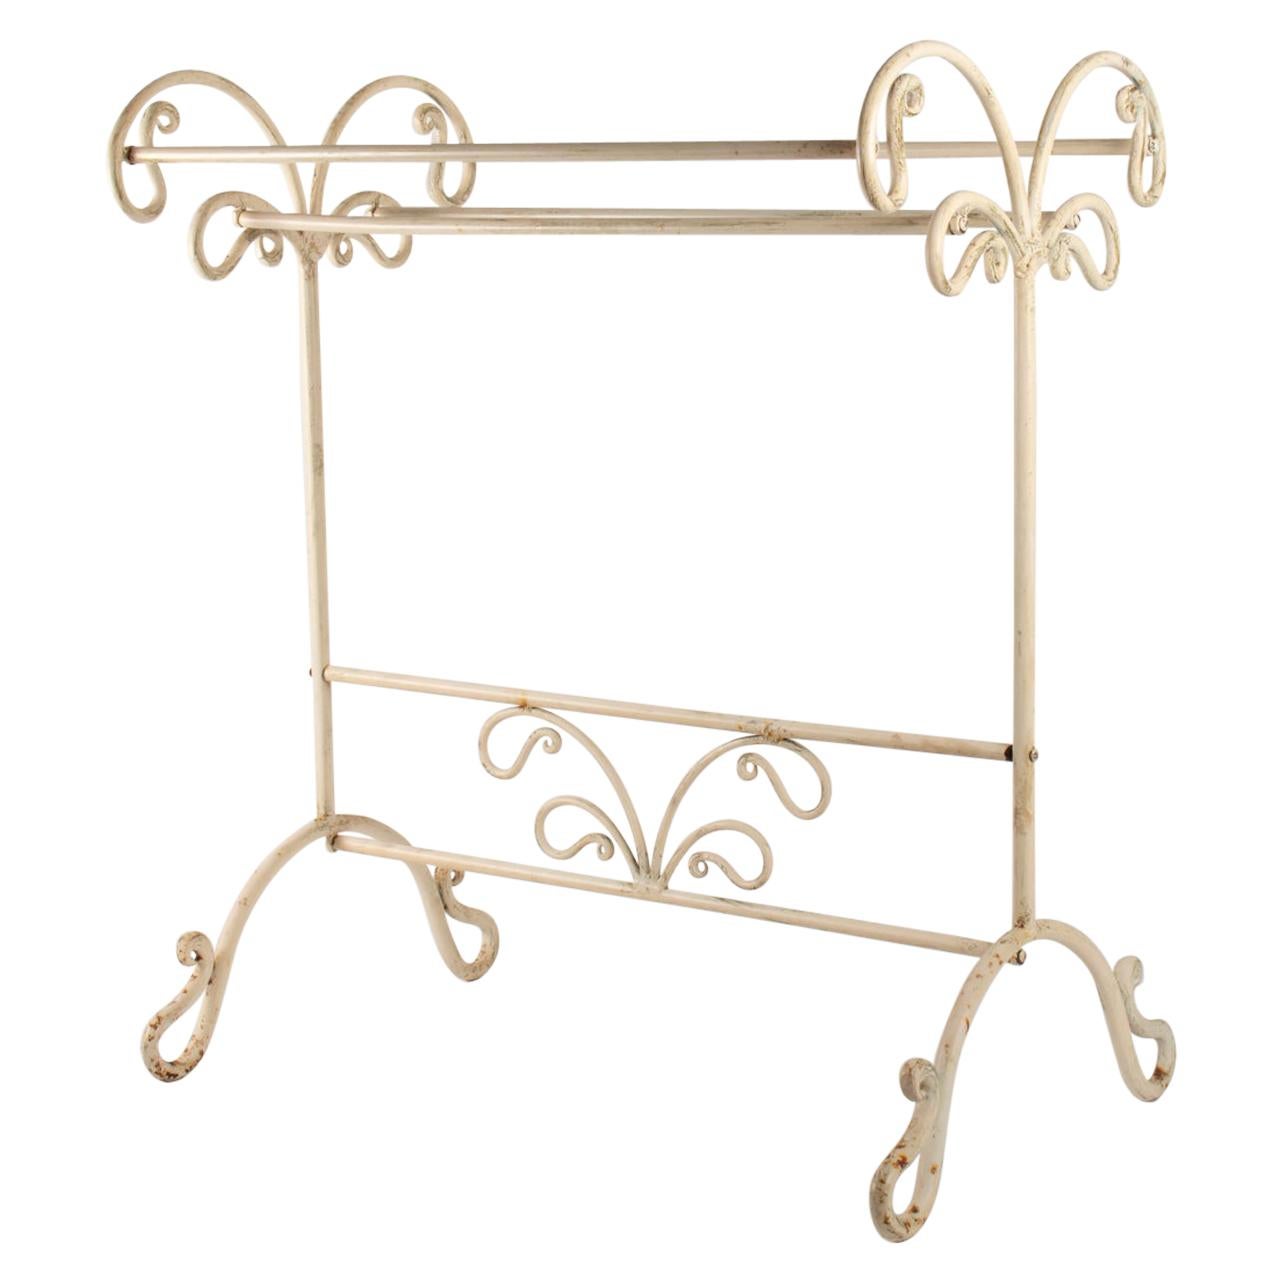 Wrought Iron Towel Bar from the Beginning of the 20th Century Style, 1900-1920